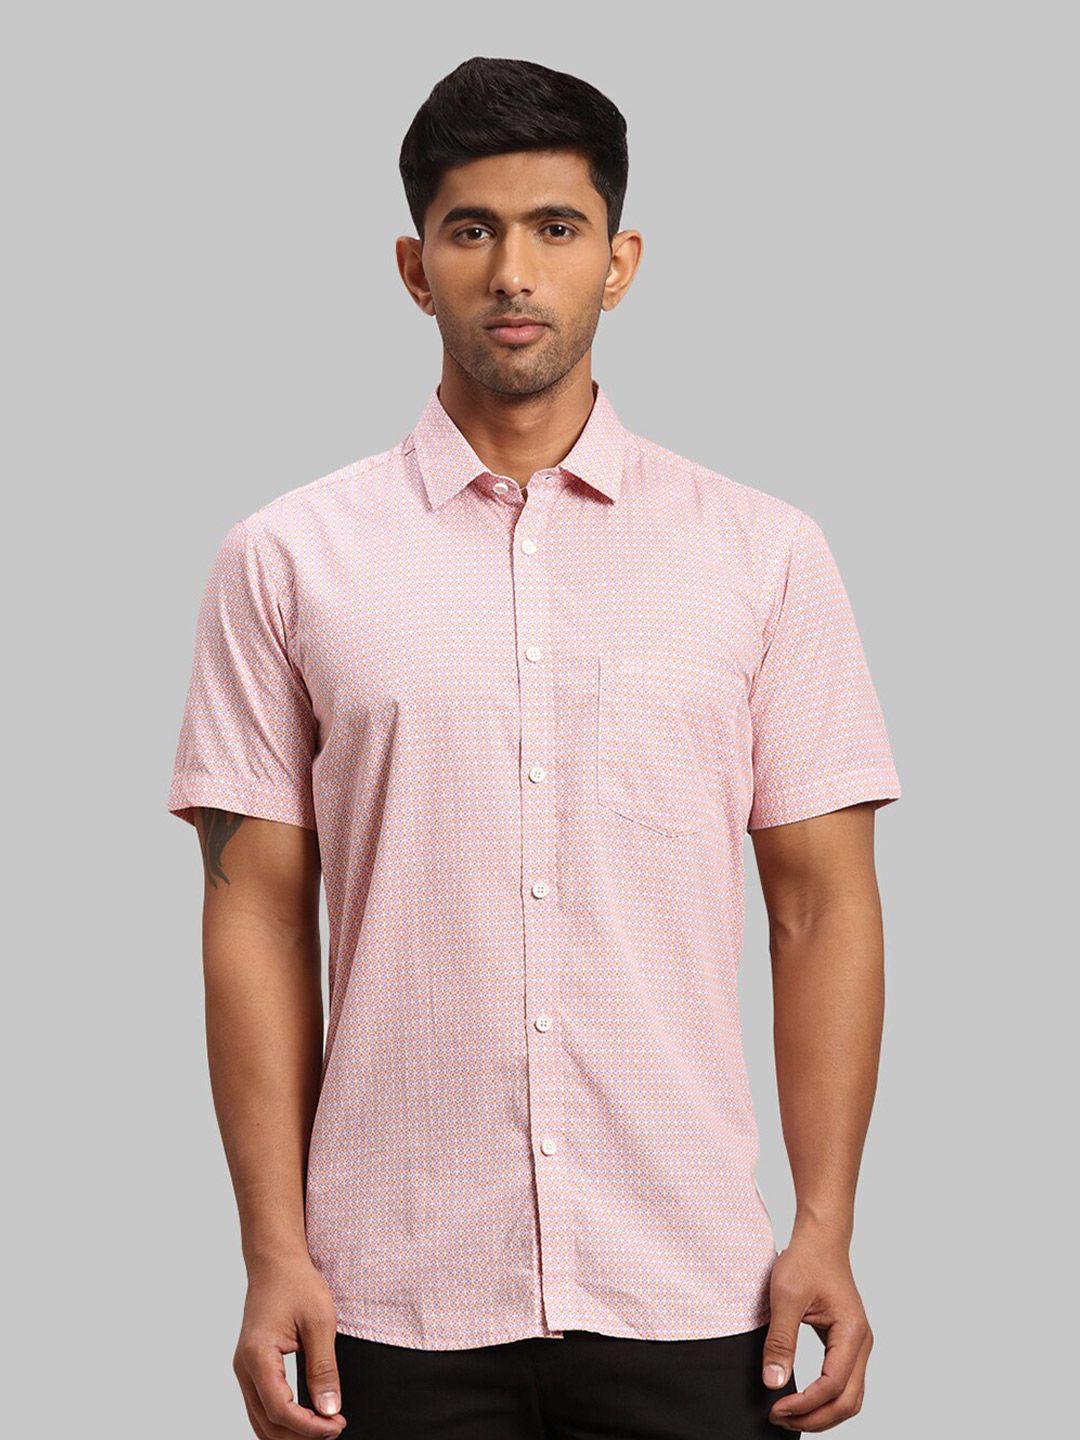 colorplus-men-tailored-fit-printed-cotton-casual-shirt